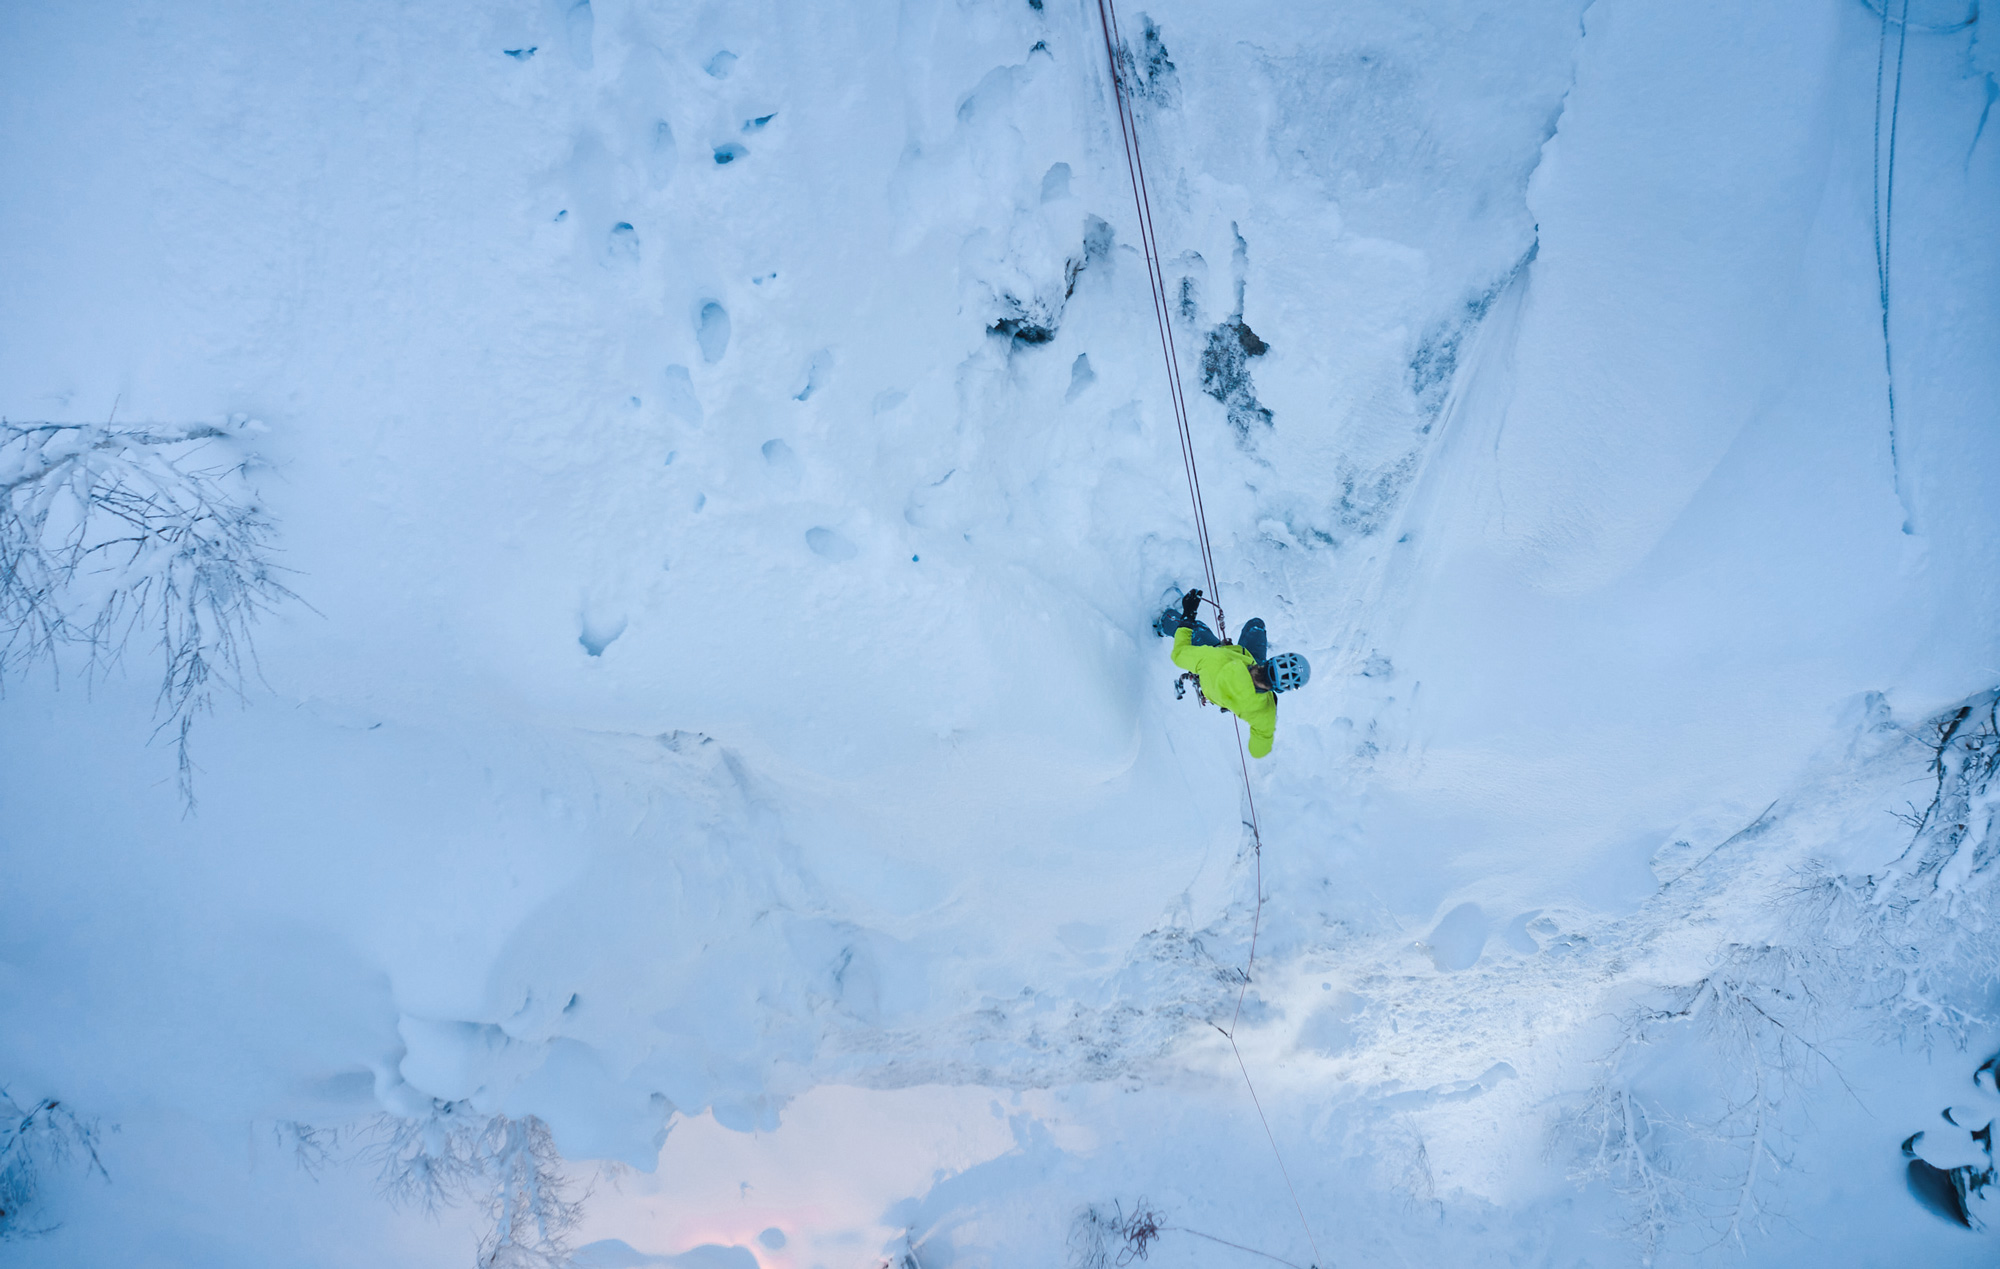 Bird's eye view of an ice climber. Ice climber hangs on the rope and climbs an ice wall